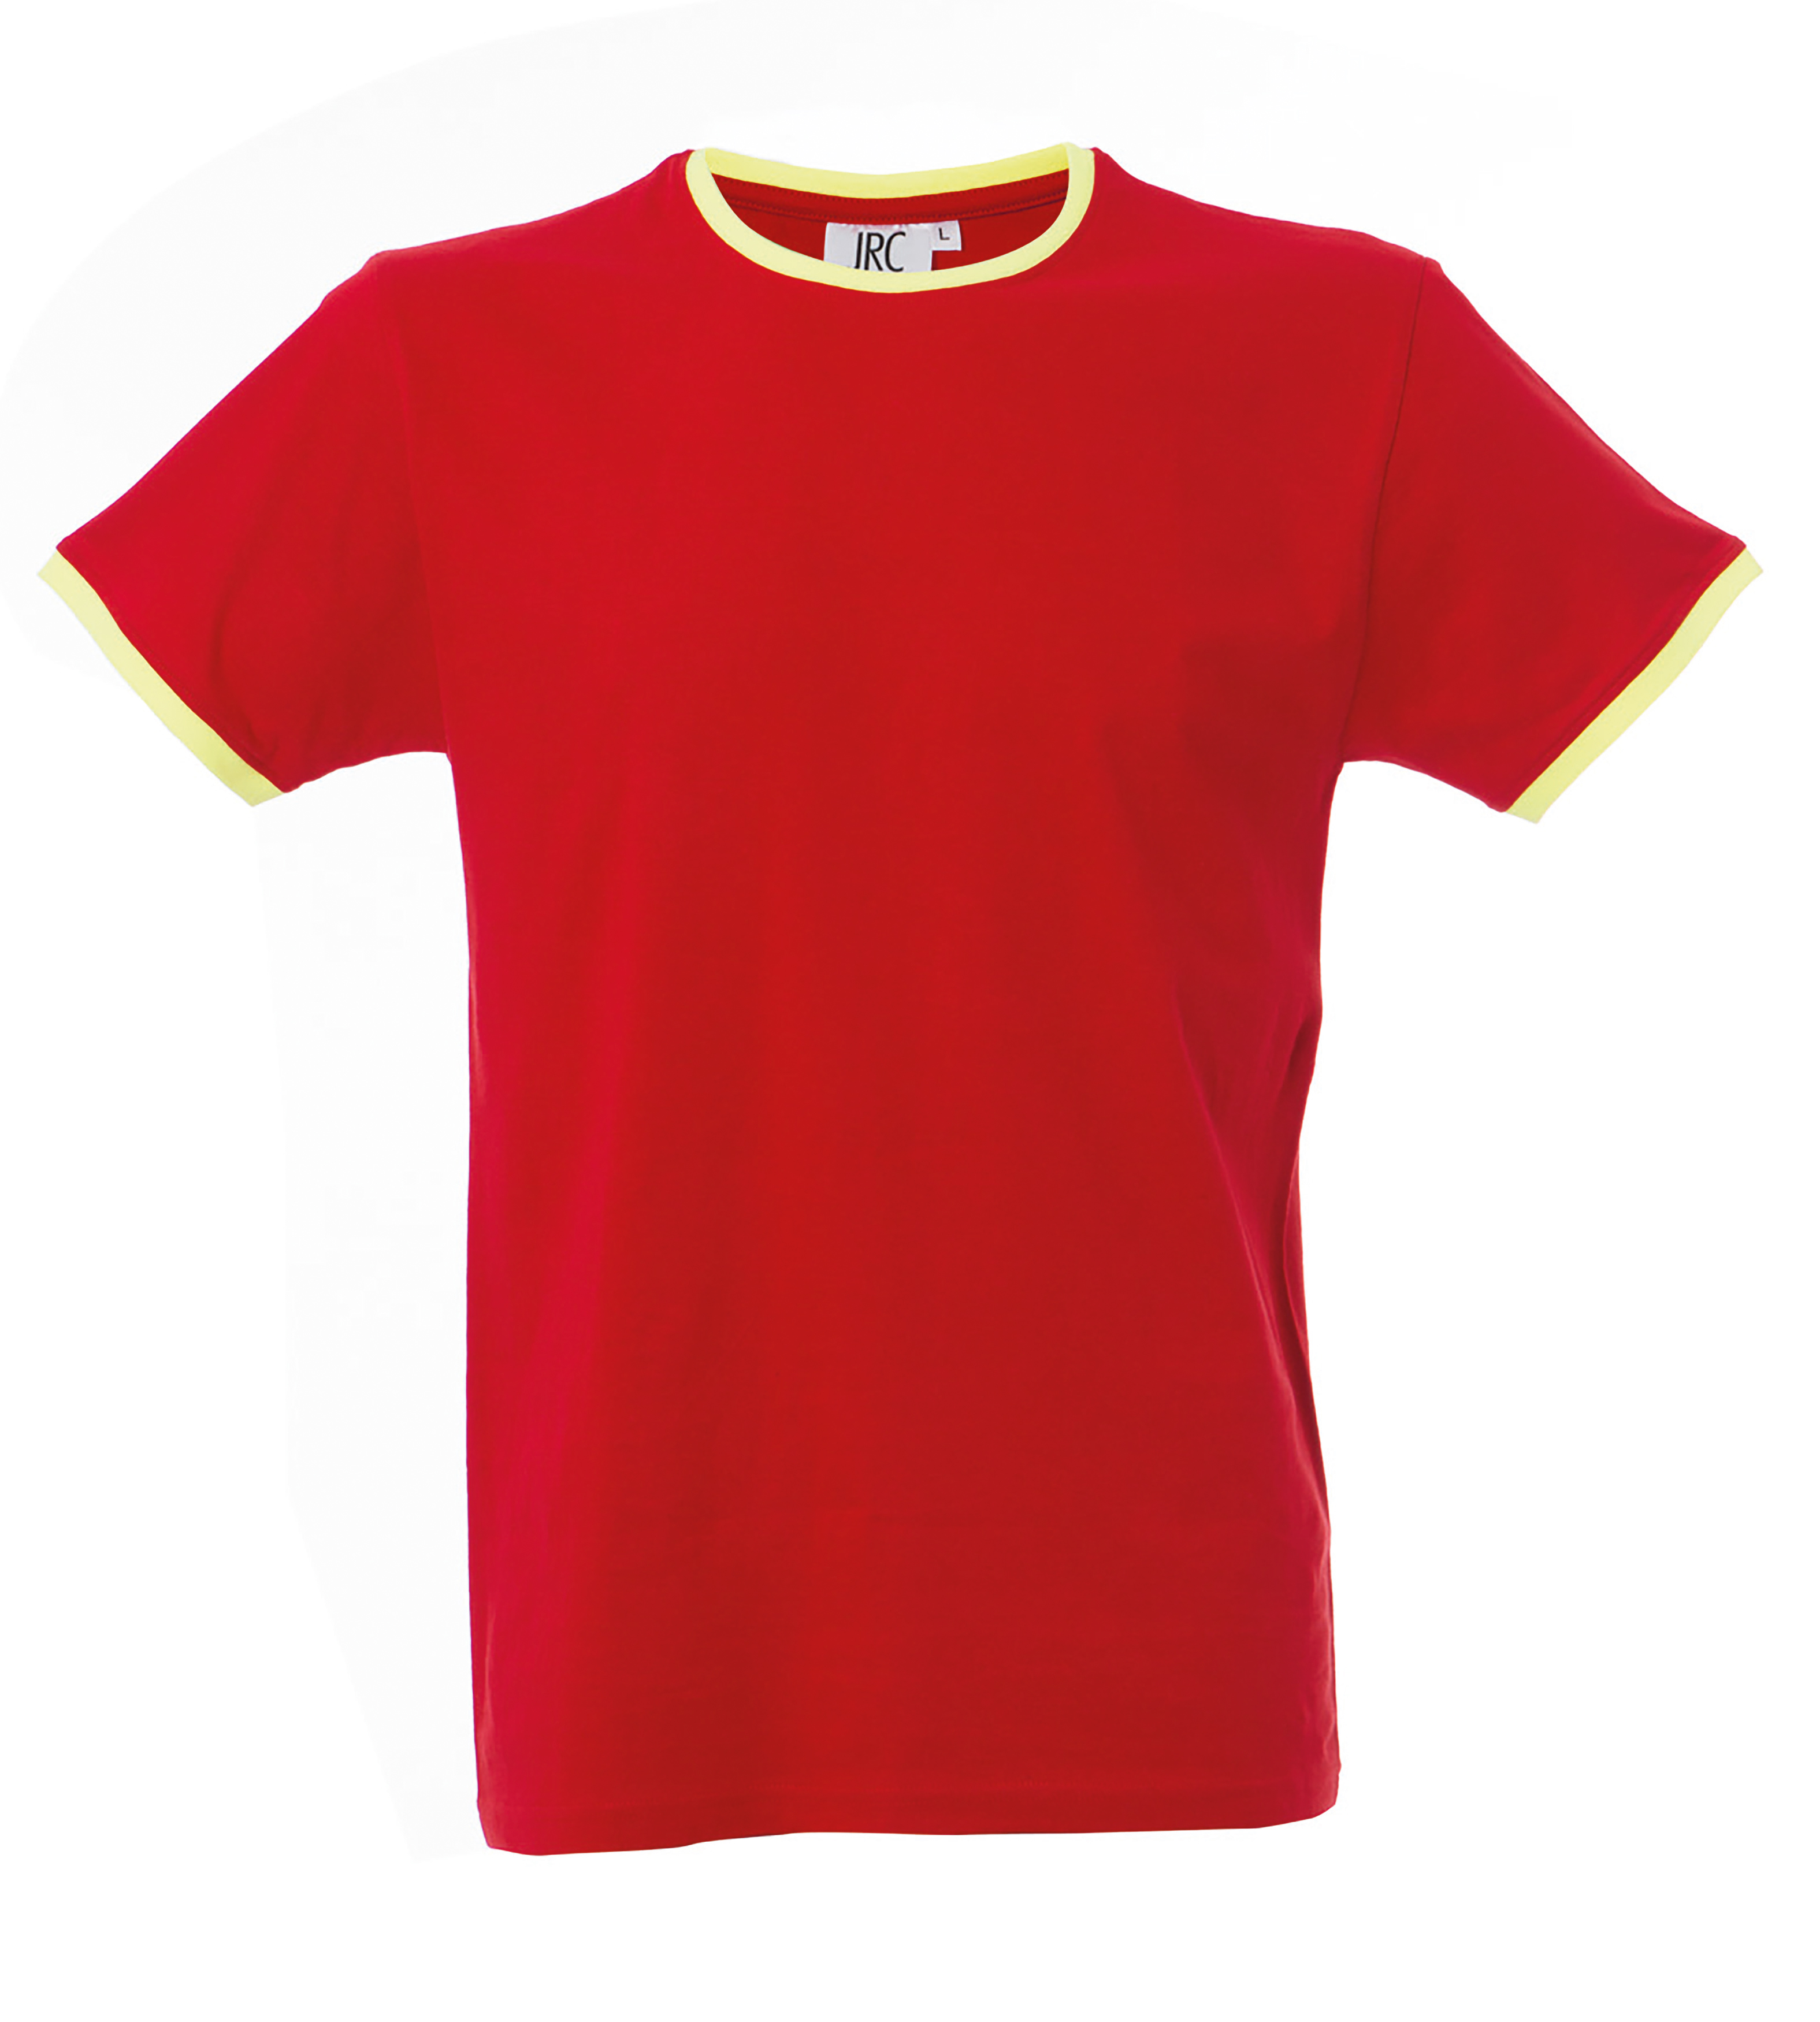 T-shirt Lipsia (variante colore: red)